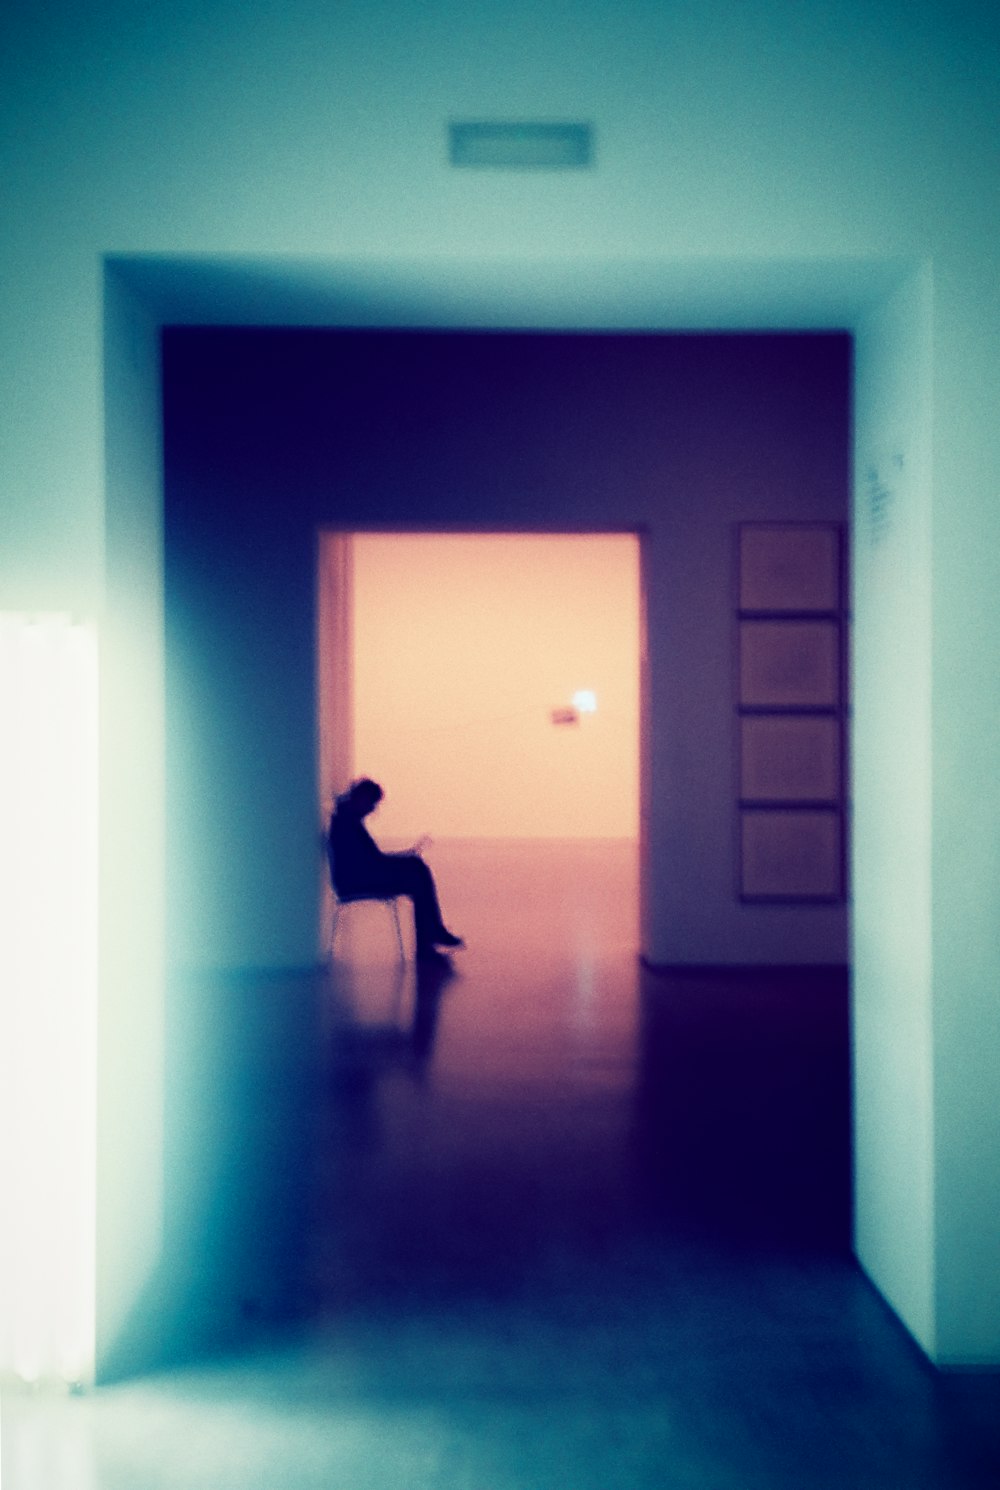 a person sitting on a chair in a room